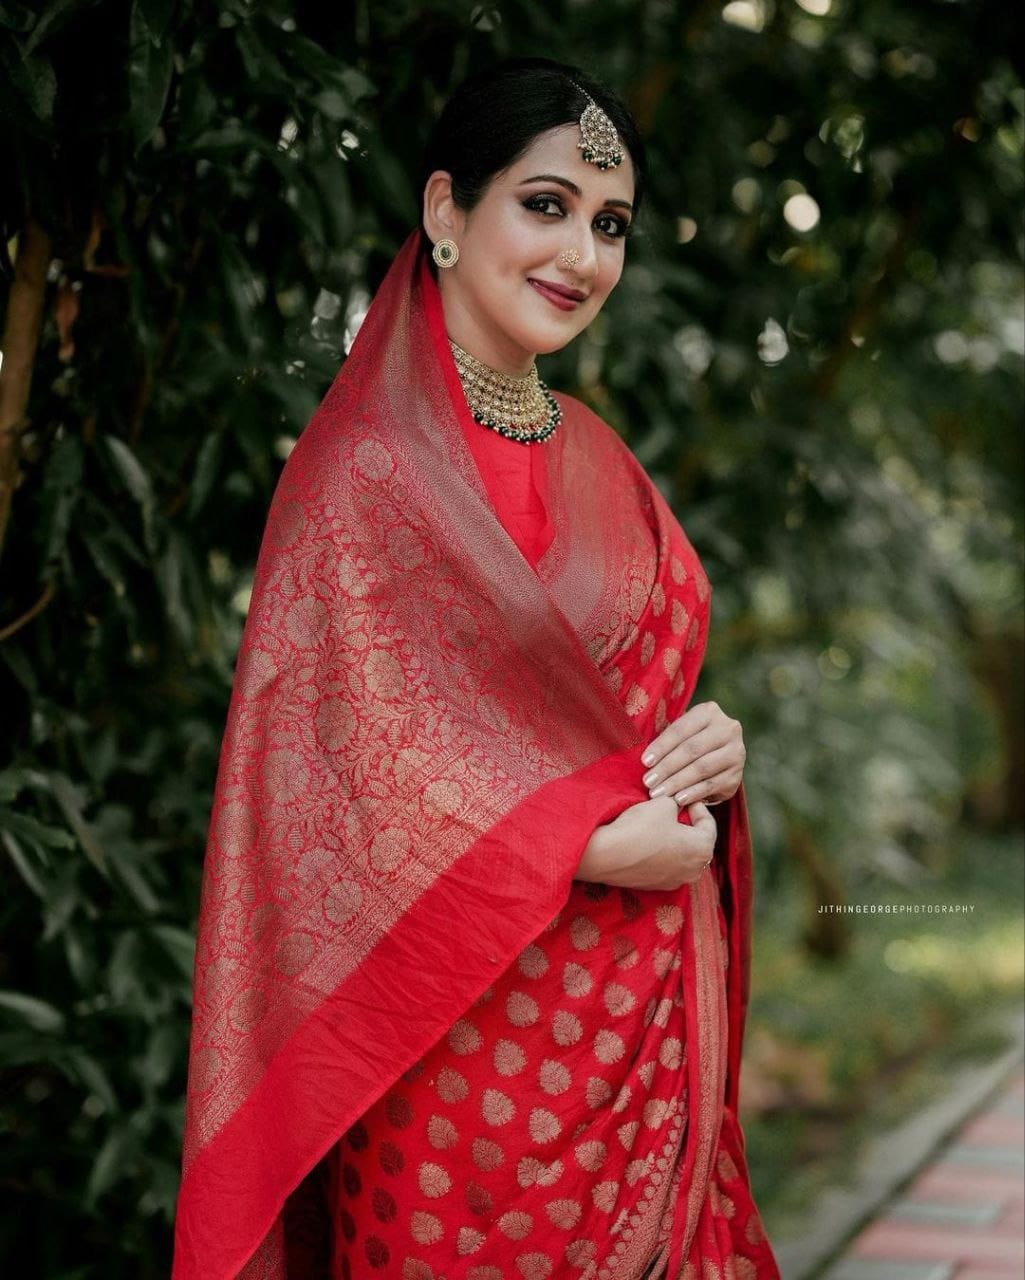 "Elegance in Every Drape: Soft Silk Sarees, Your Timeless Style Statement!"